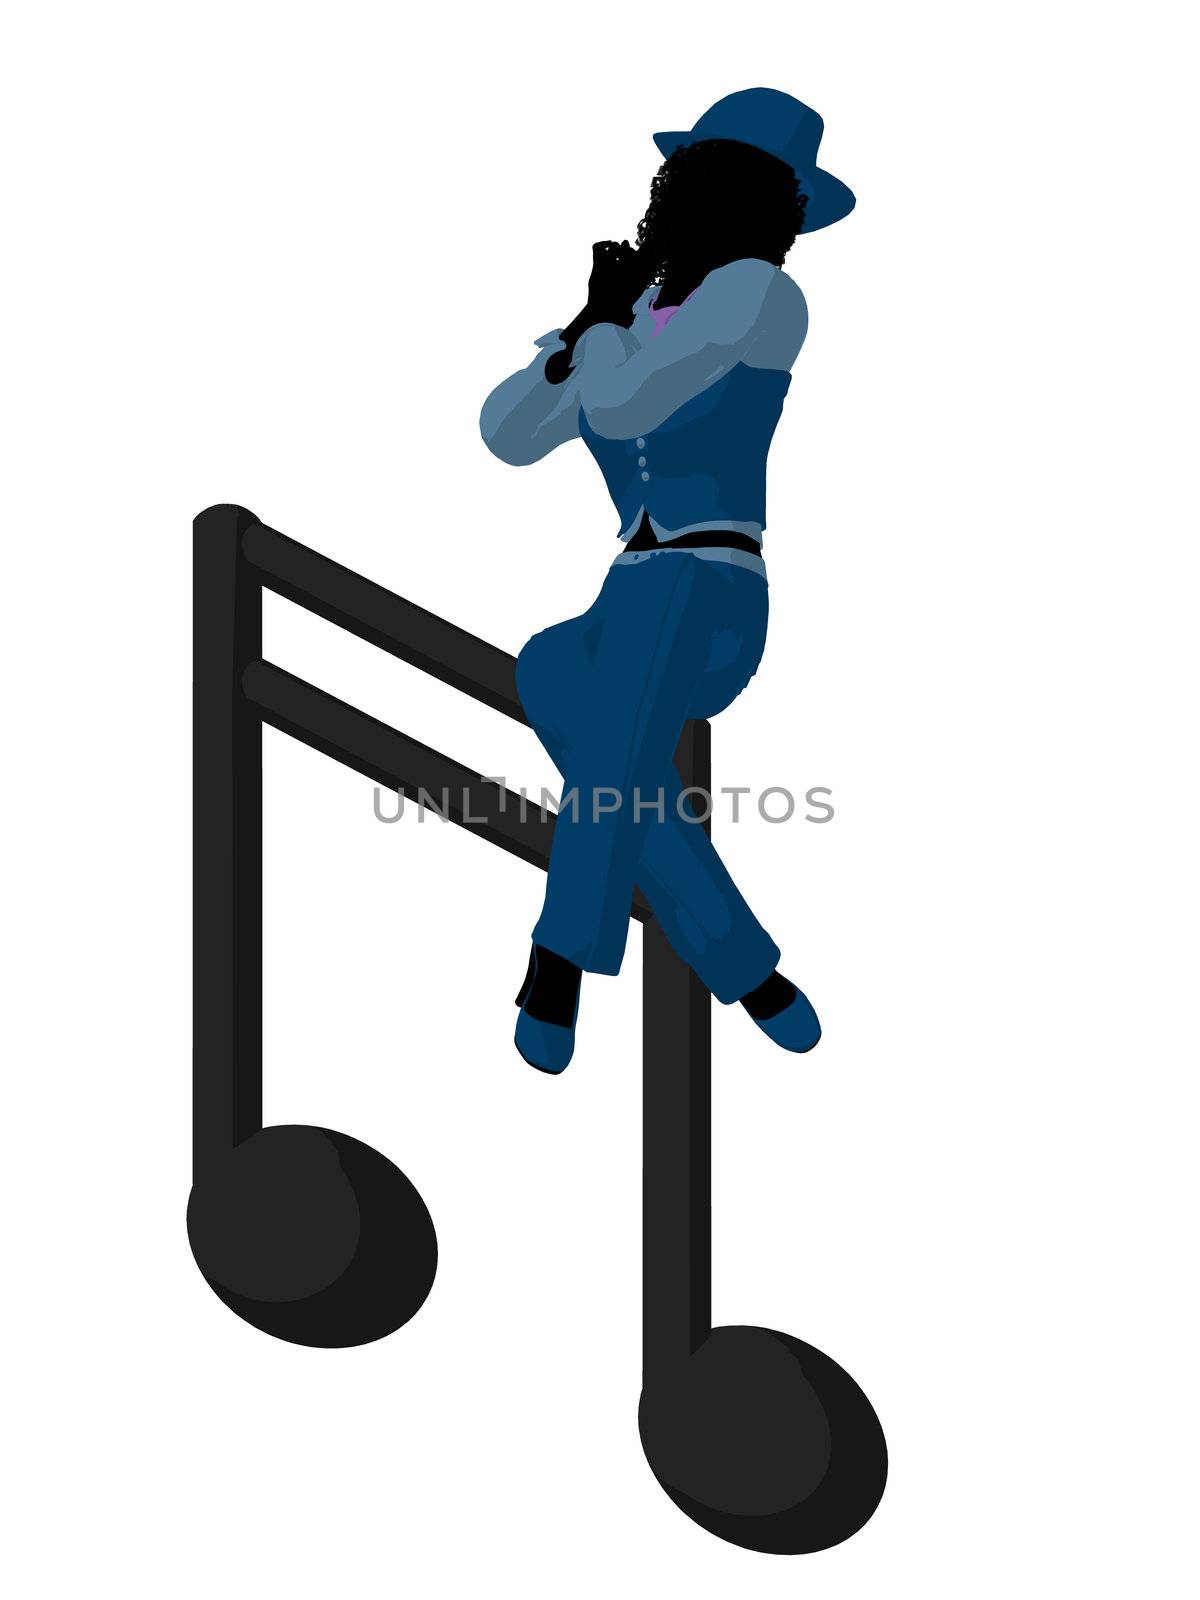 African ameircan jazz musician on a music note on a white background